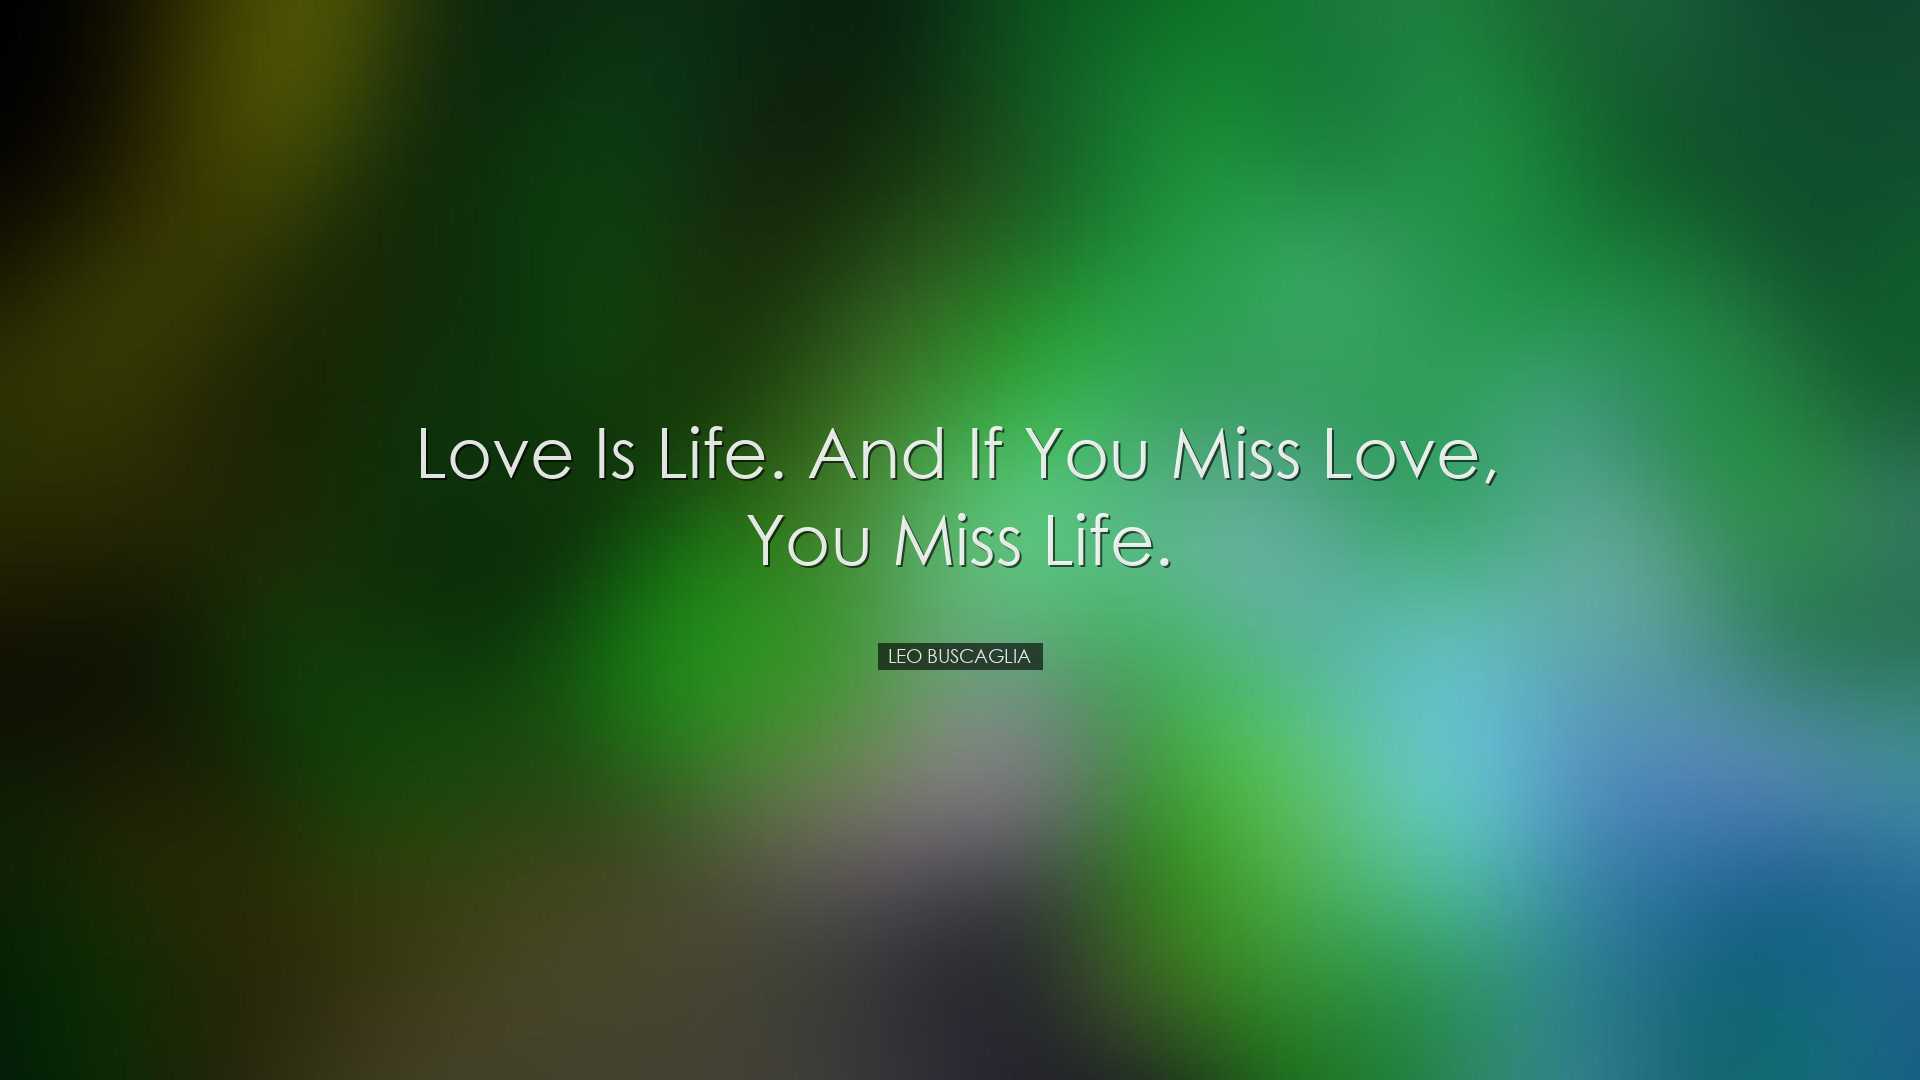 Love is life. And if you miss love, you miss life. - Leo Buscaglia